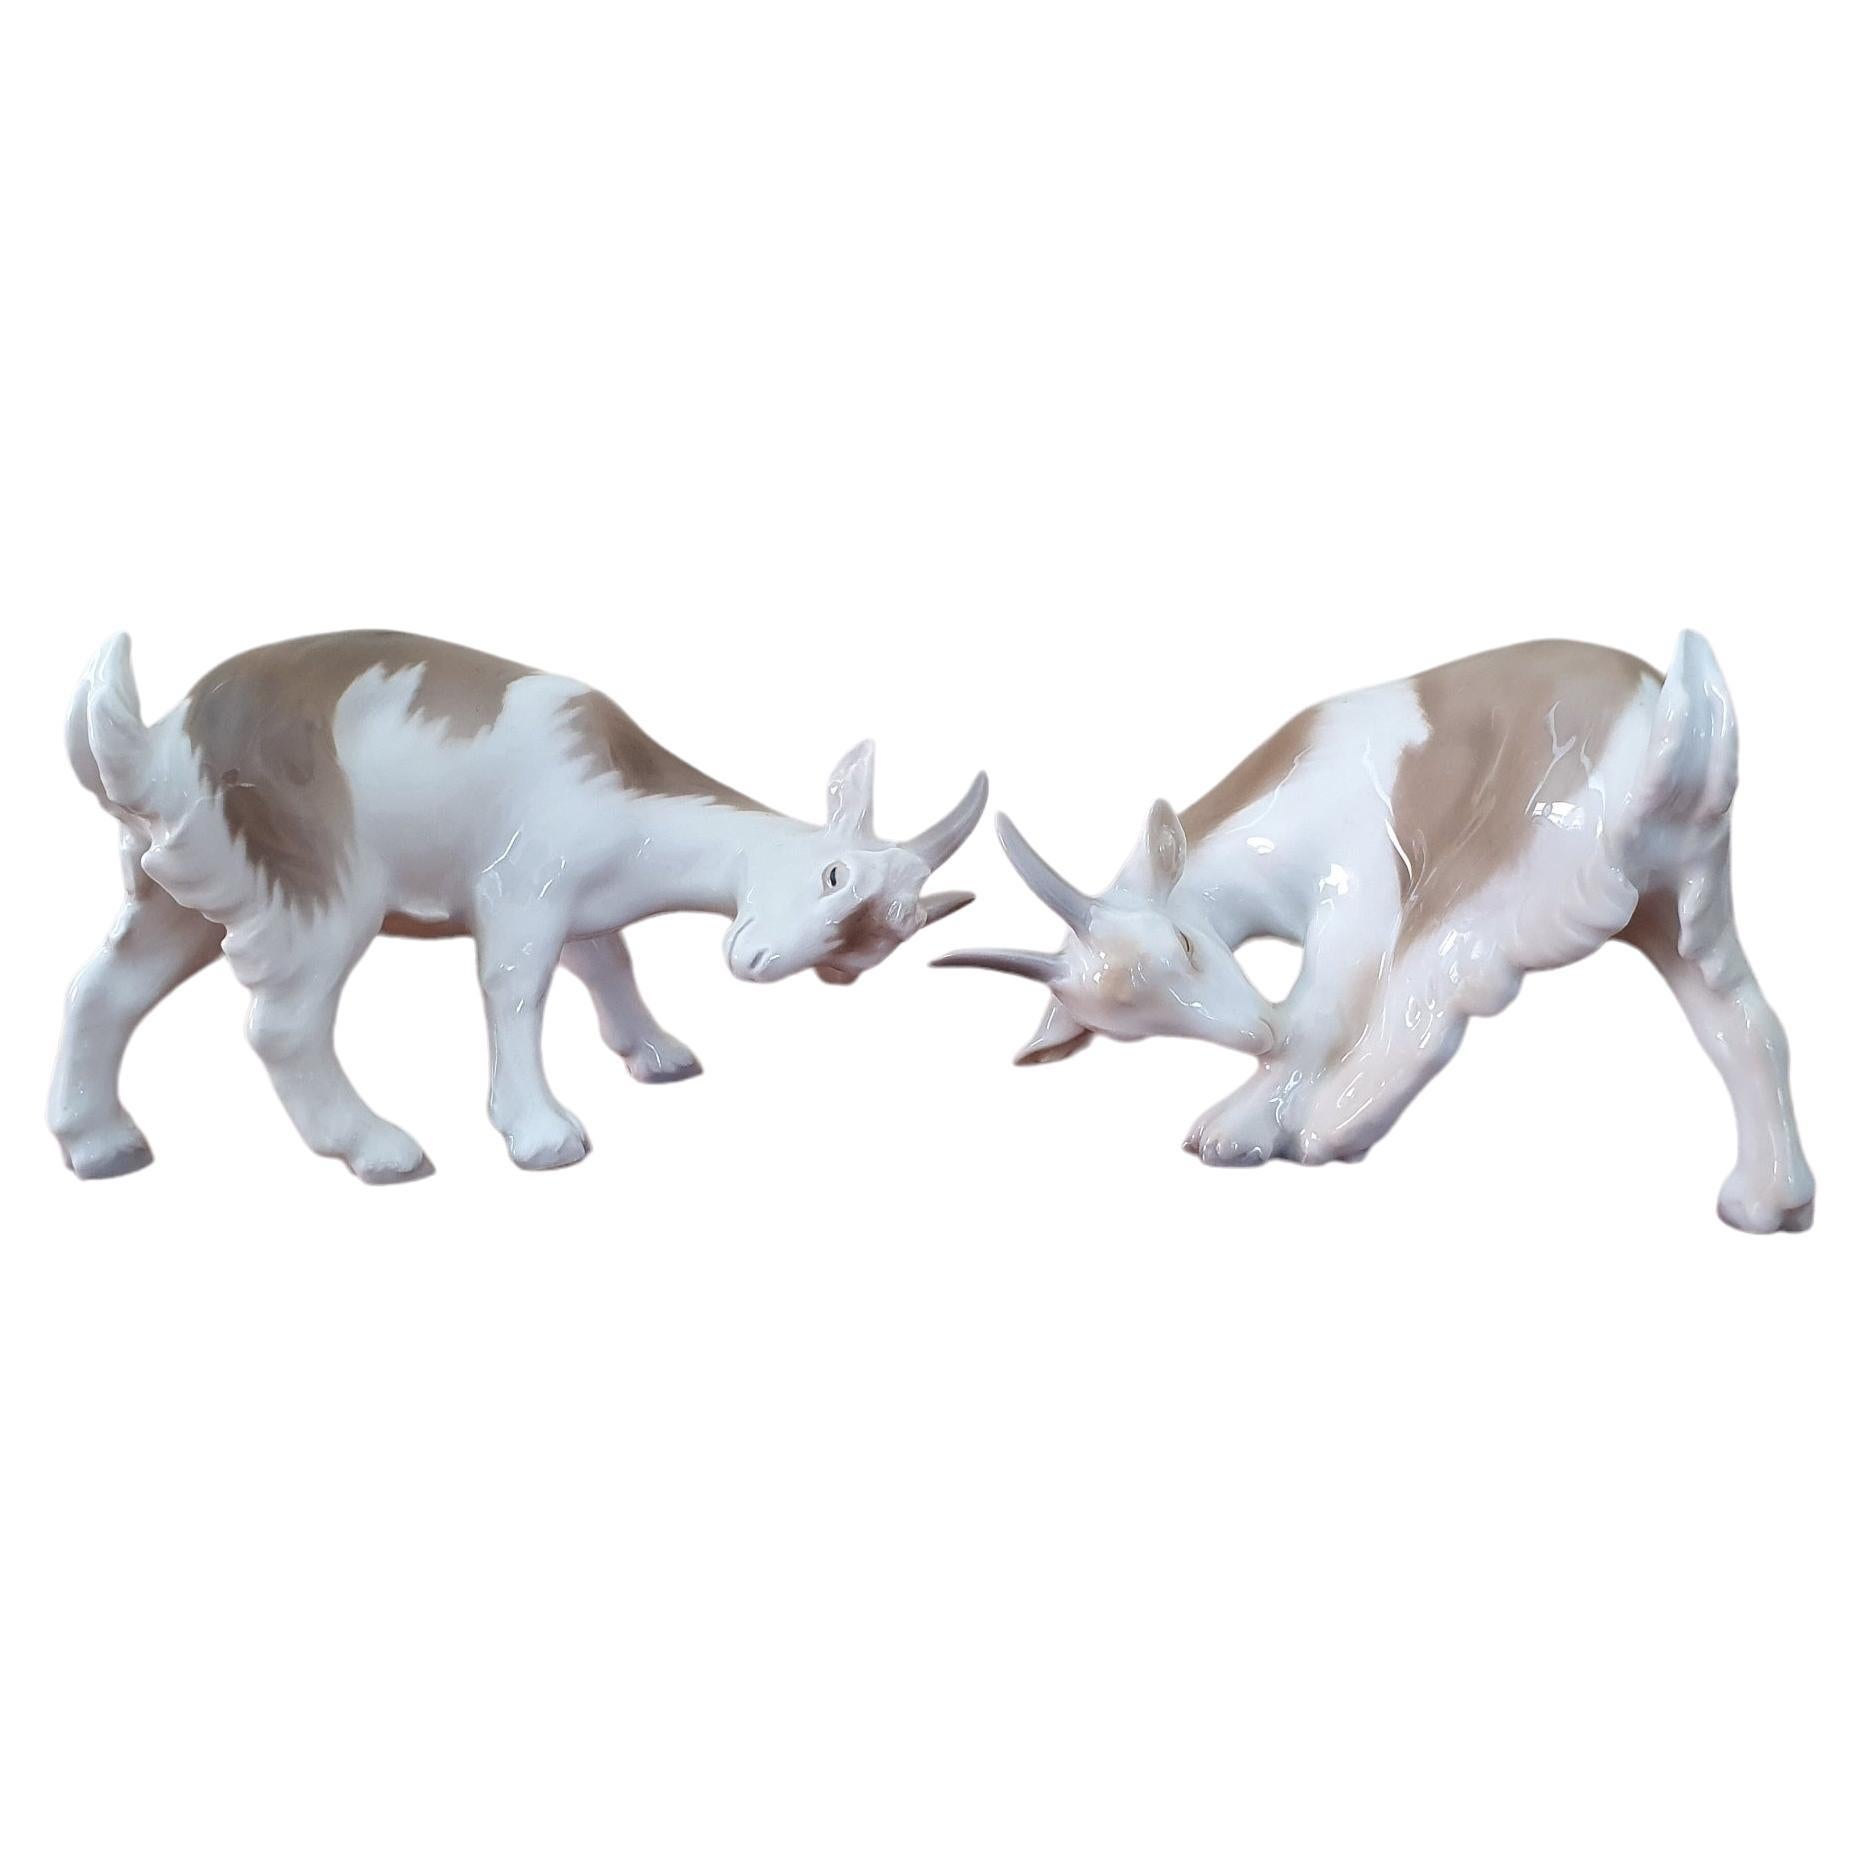 A pair of 20th Century Porcelain Goats by Bing & Grøndahl For Sale